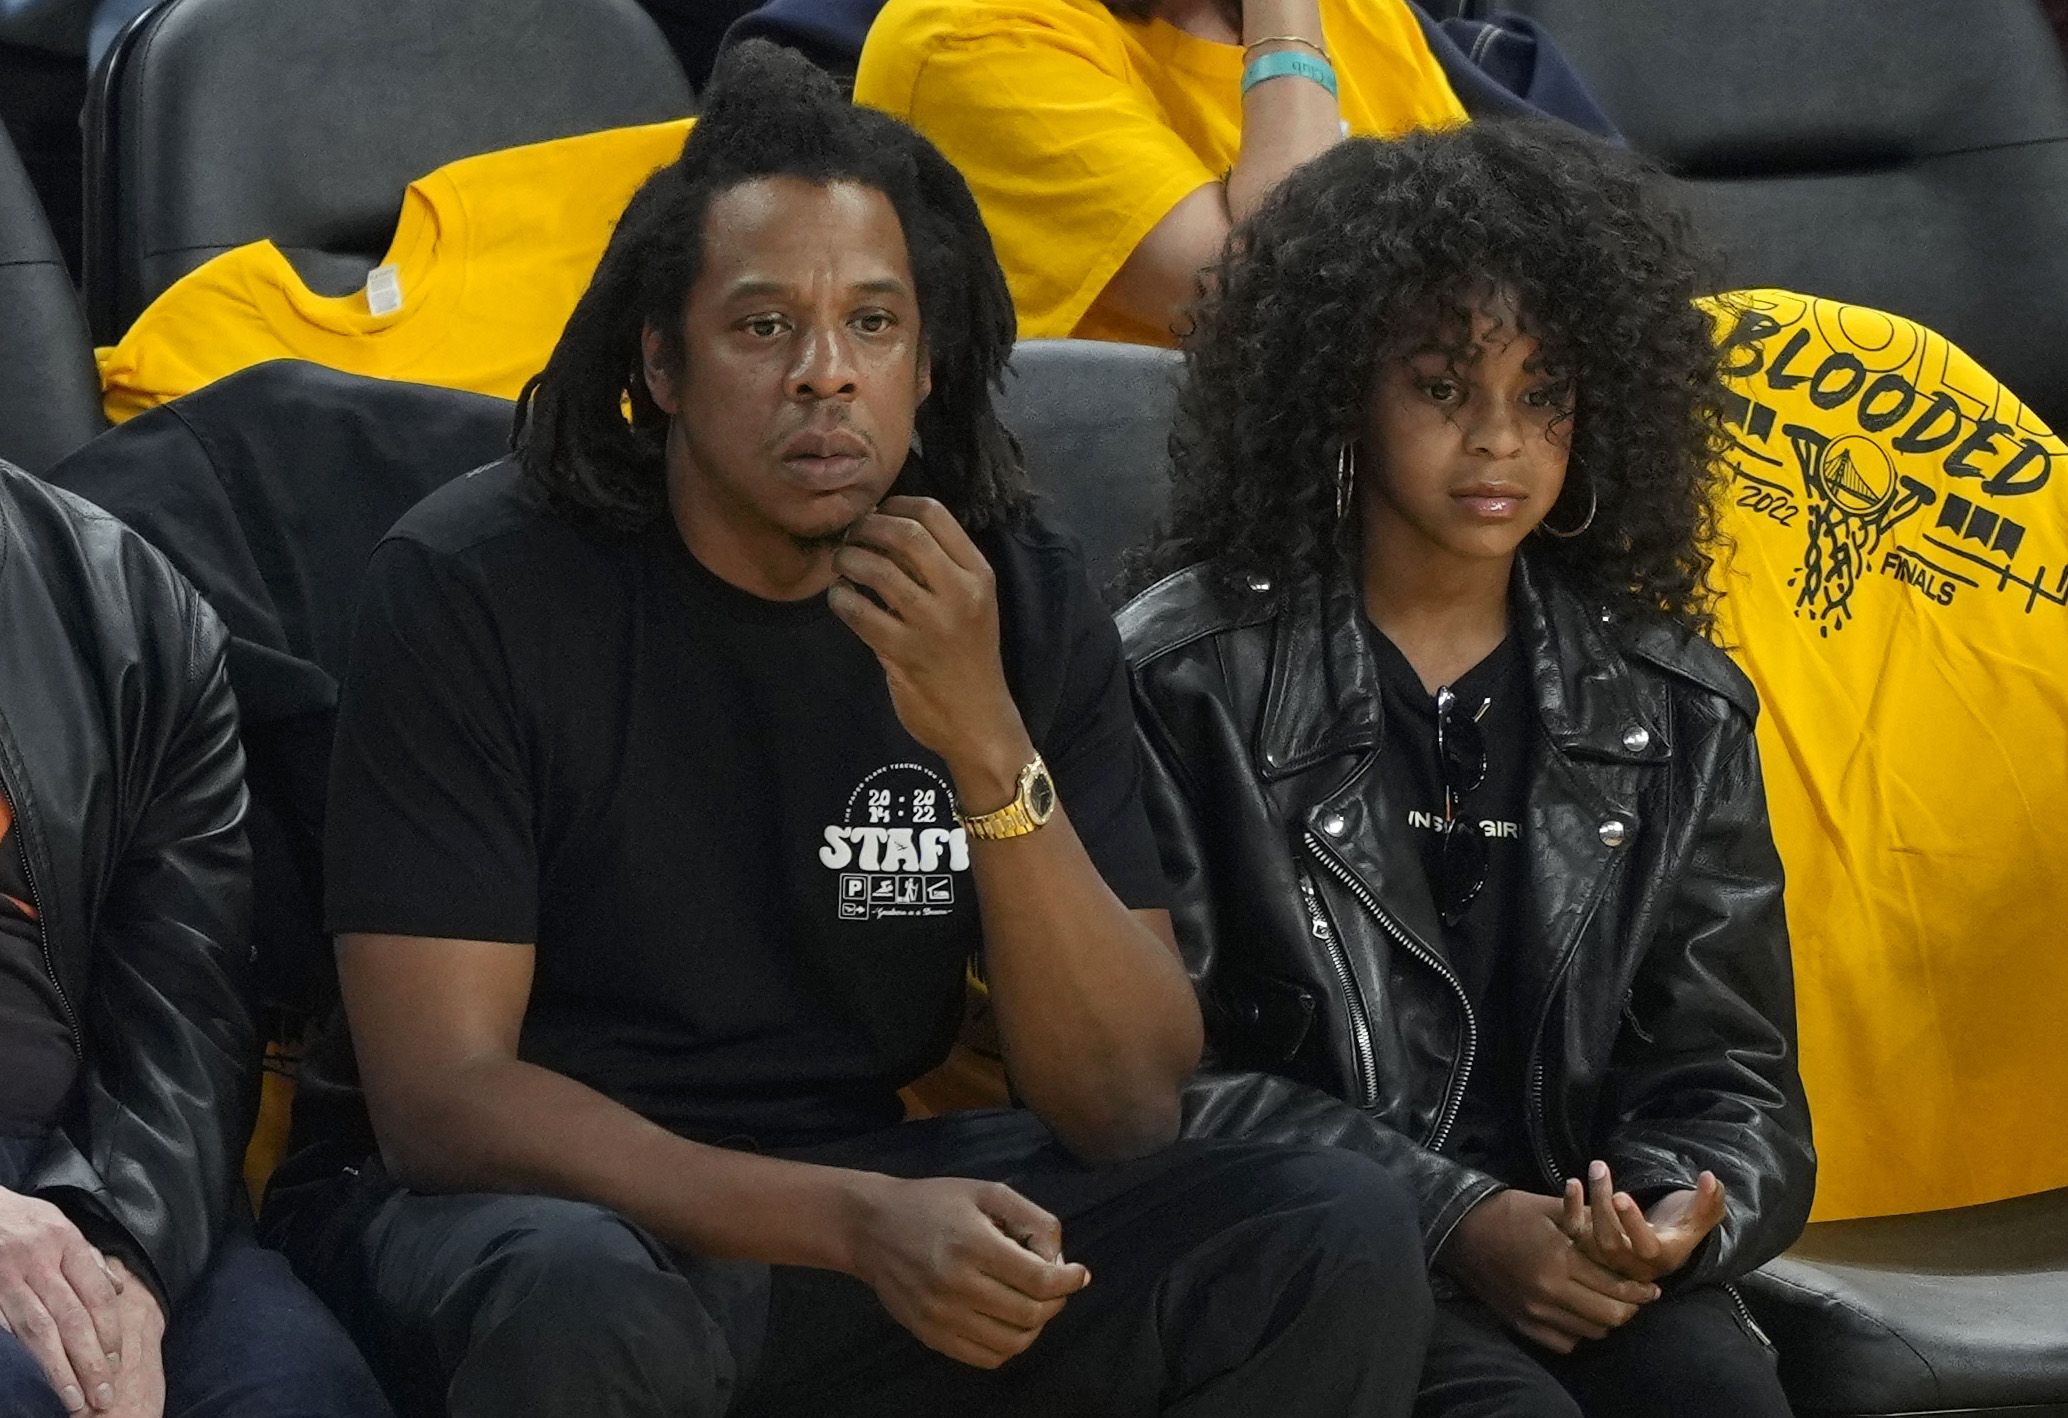 See Blue Ivy Carter at the 2023 Super Bowl